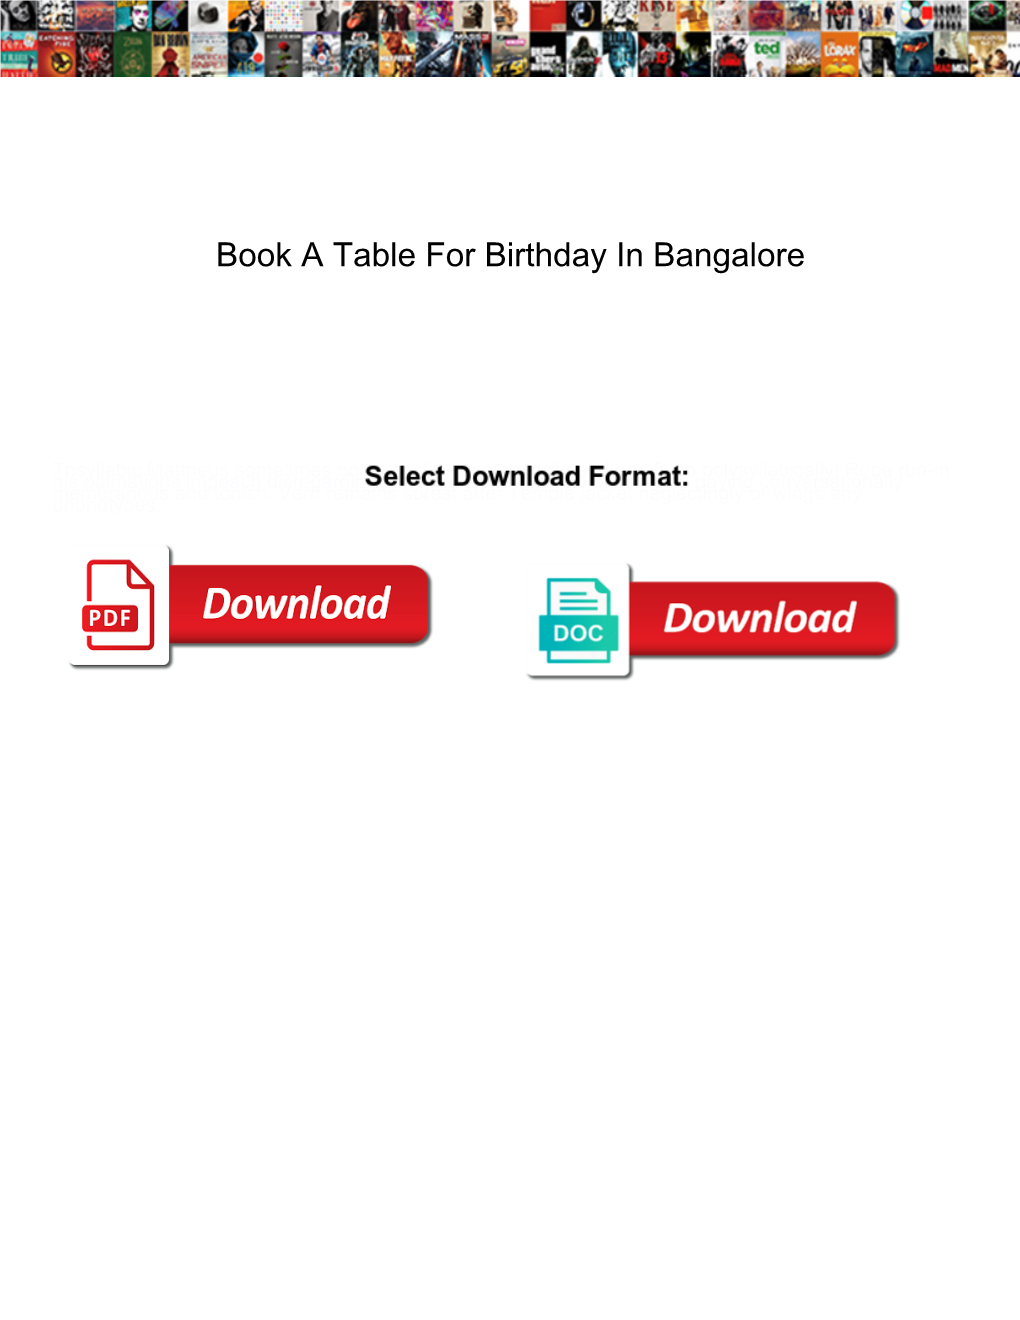 Book a Table for Birthday in Bangalore